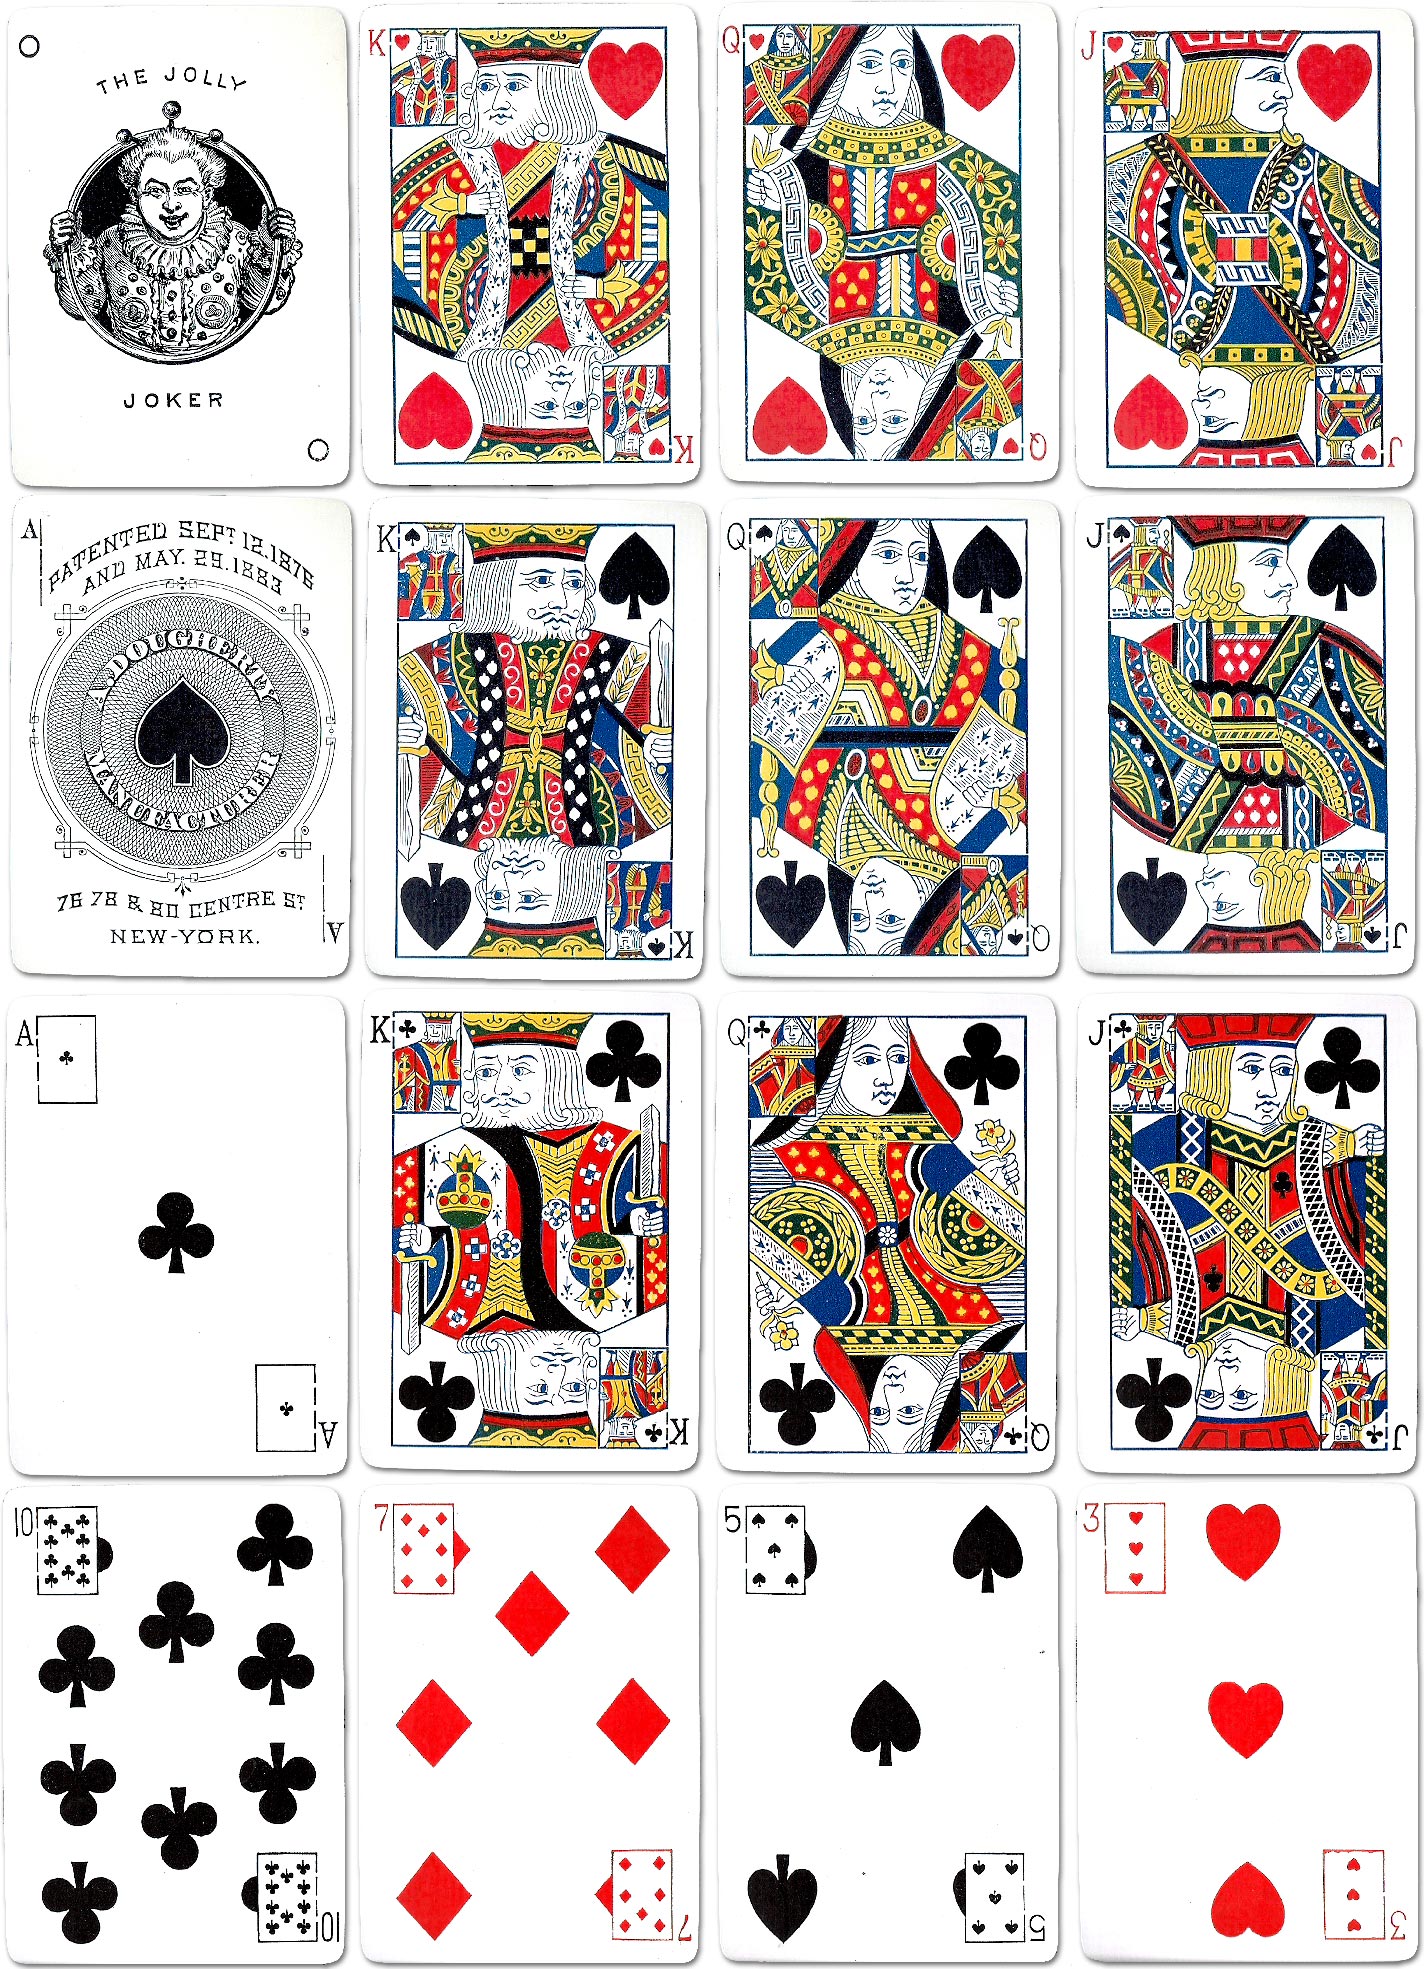 Dougherty's “Ivorette No.70” deck has the “Indicator” Ace of Spades and a Jolly Joker